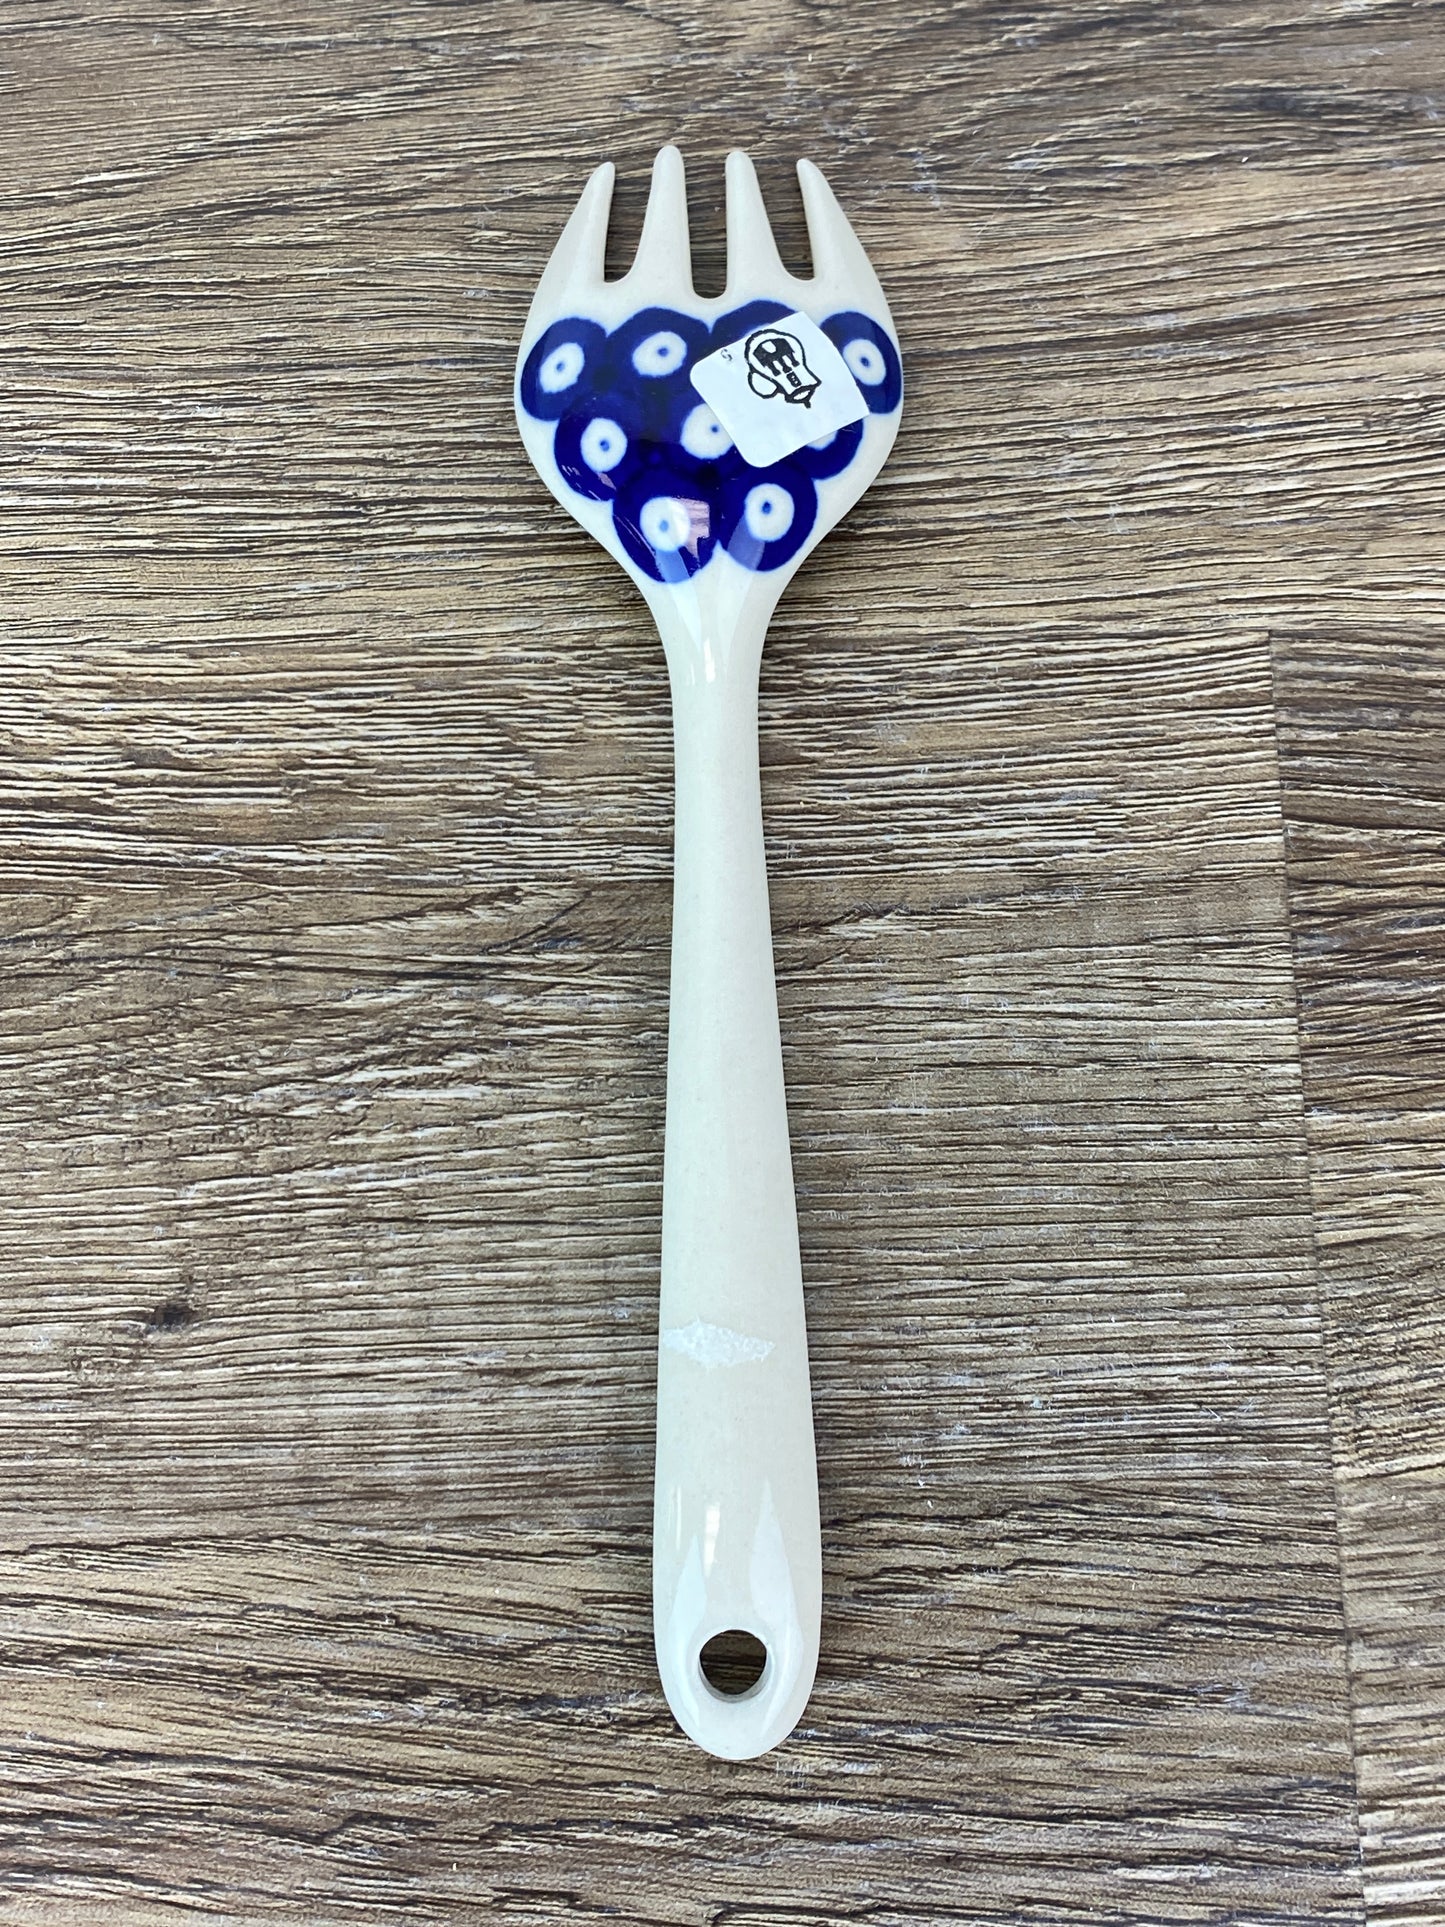 Small Serving Fork - Shape 589 - Pattern 70a